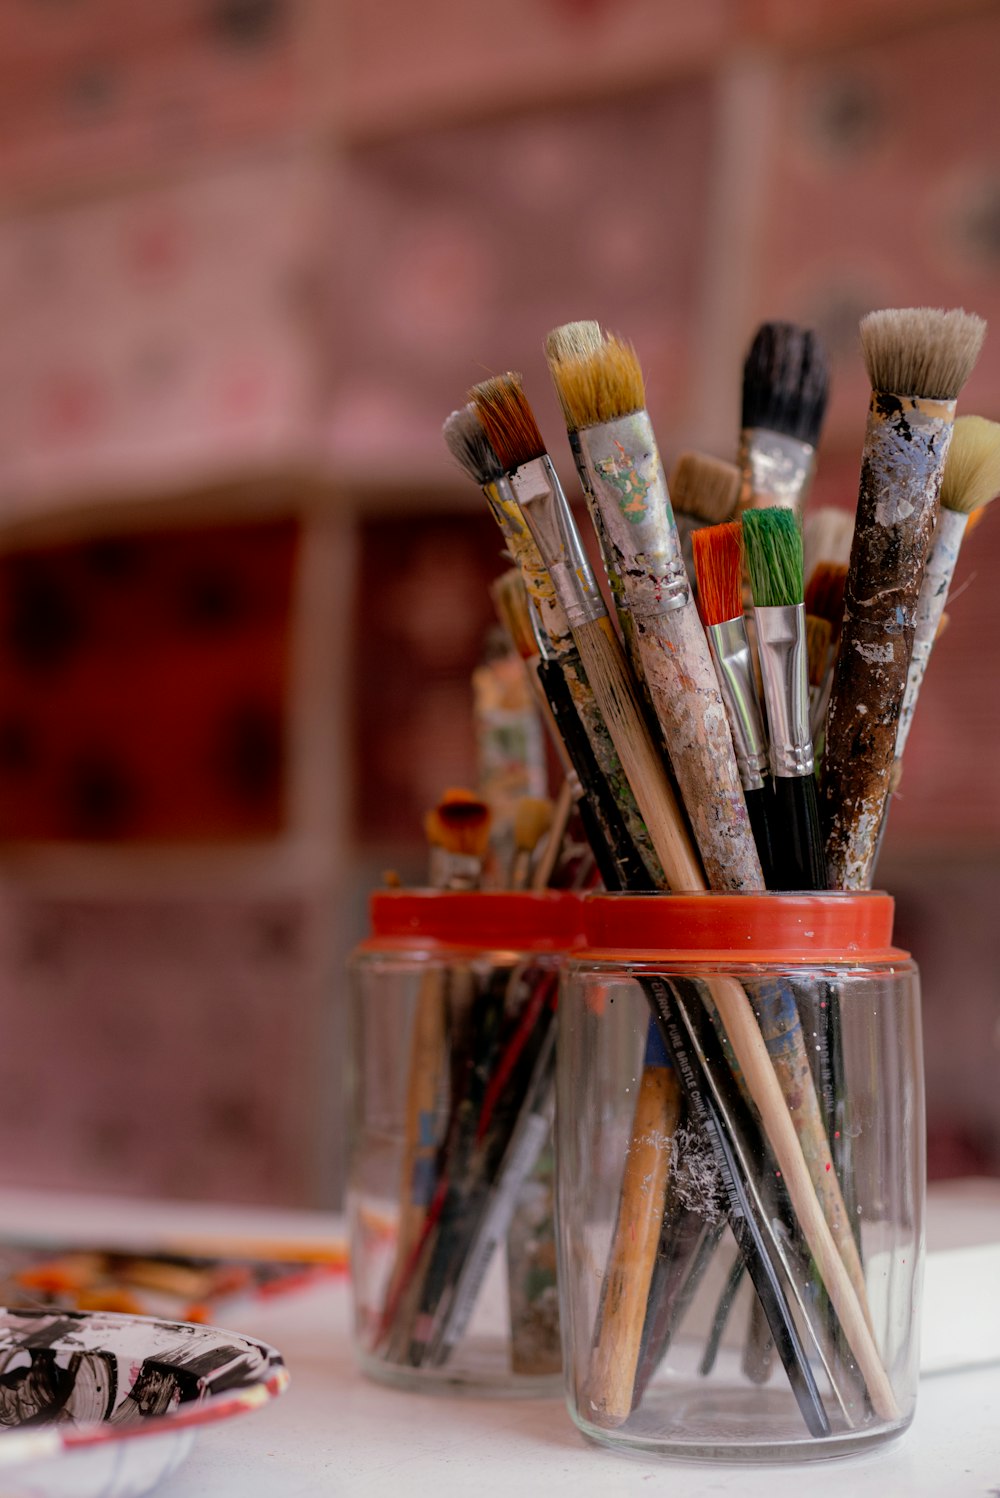 350+ Paint Brush Pictures [HD] | Download Free Images on Unsplash